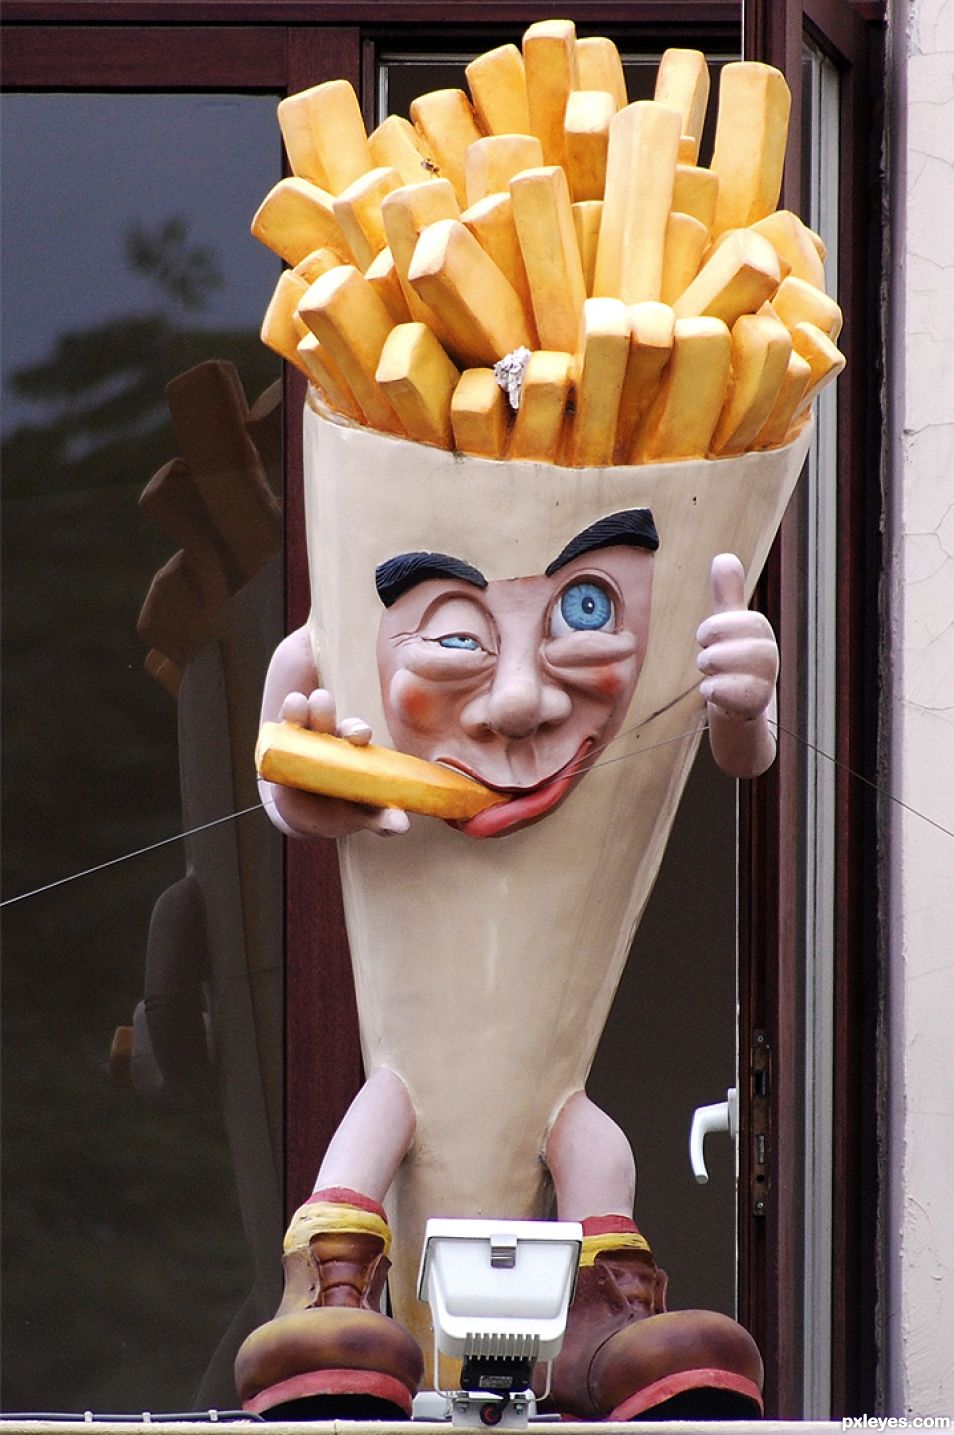 French fries ...